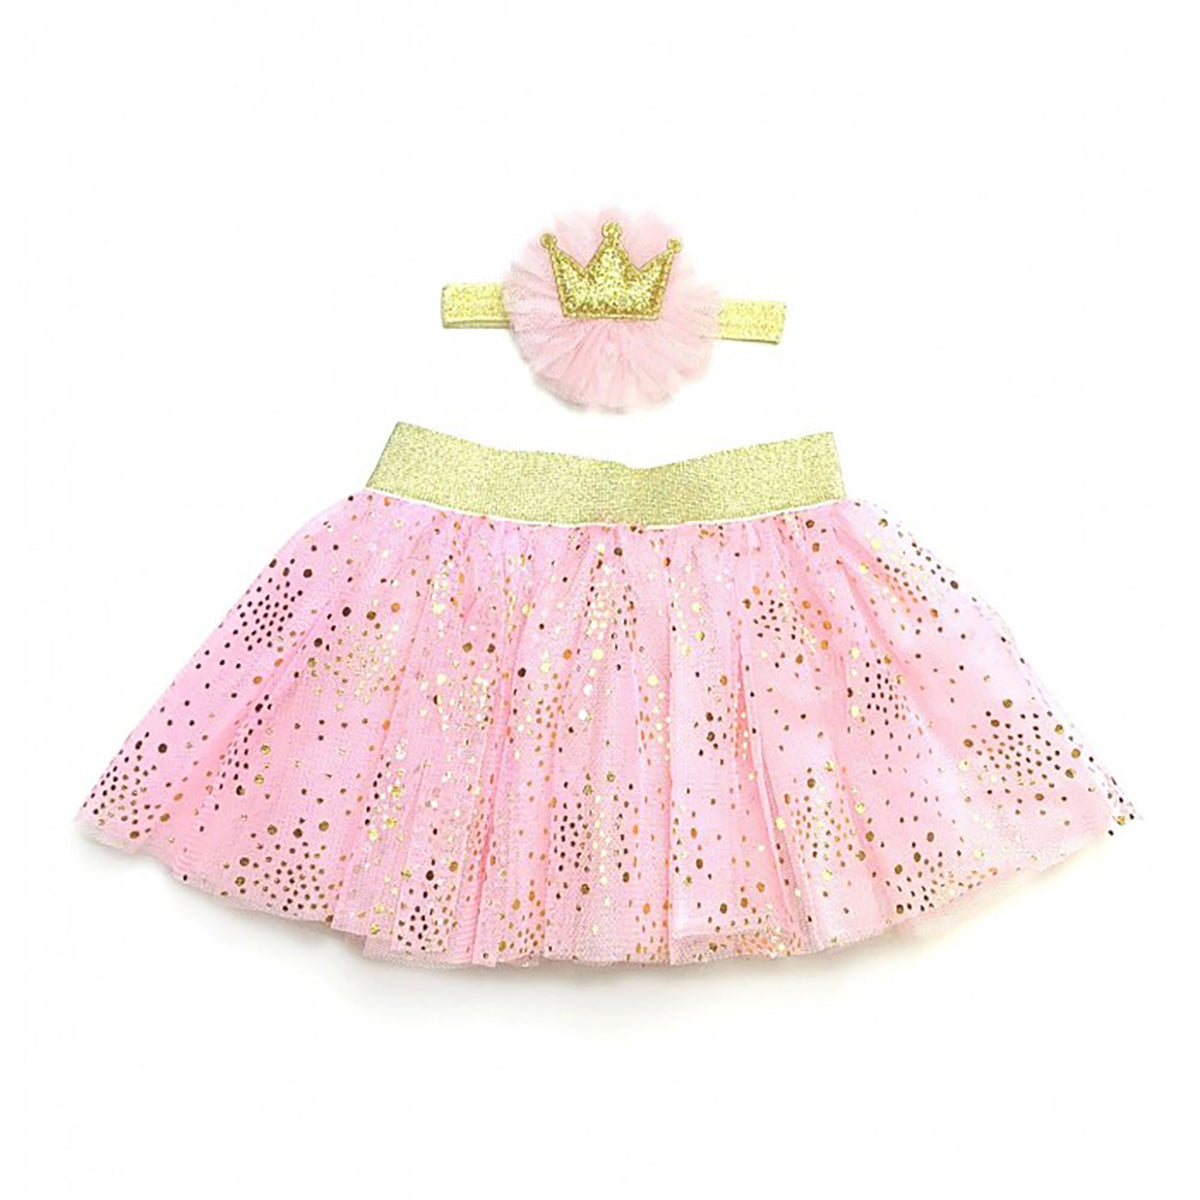 IVY TRADING INC. Costumes Accessories Pink Princess Costume Kit for Babies and Toddlers, Pink Tutu